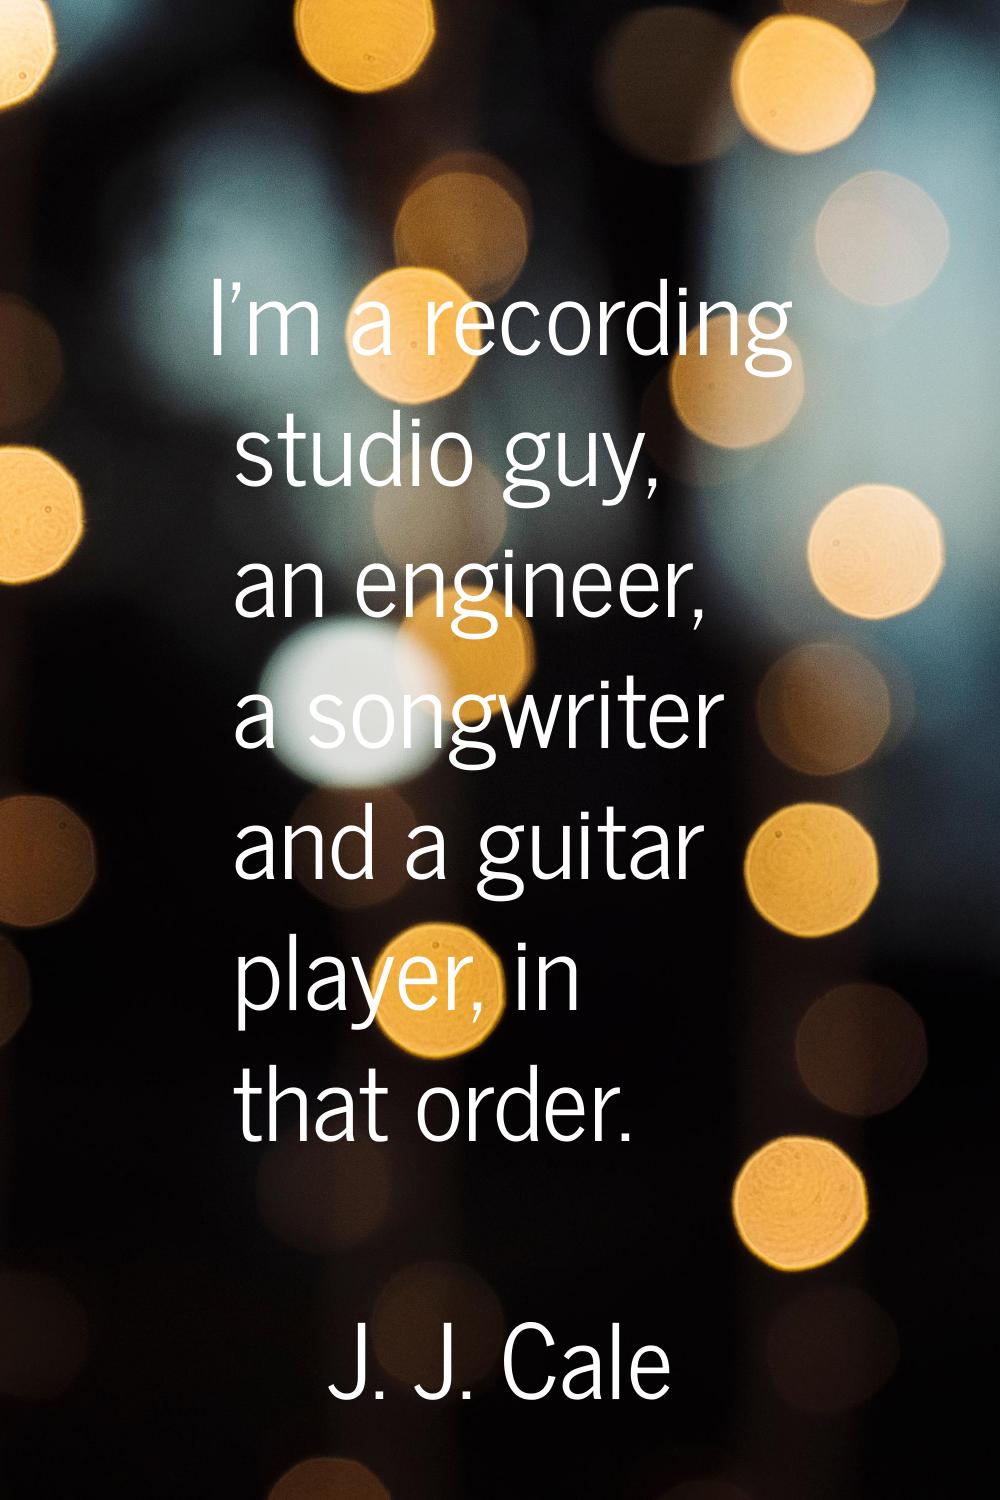 I'm a recording studio guy, an engineer, a songwriter and a guitar player, in that order.